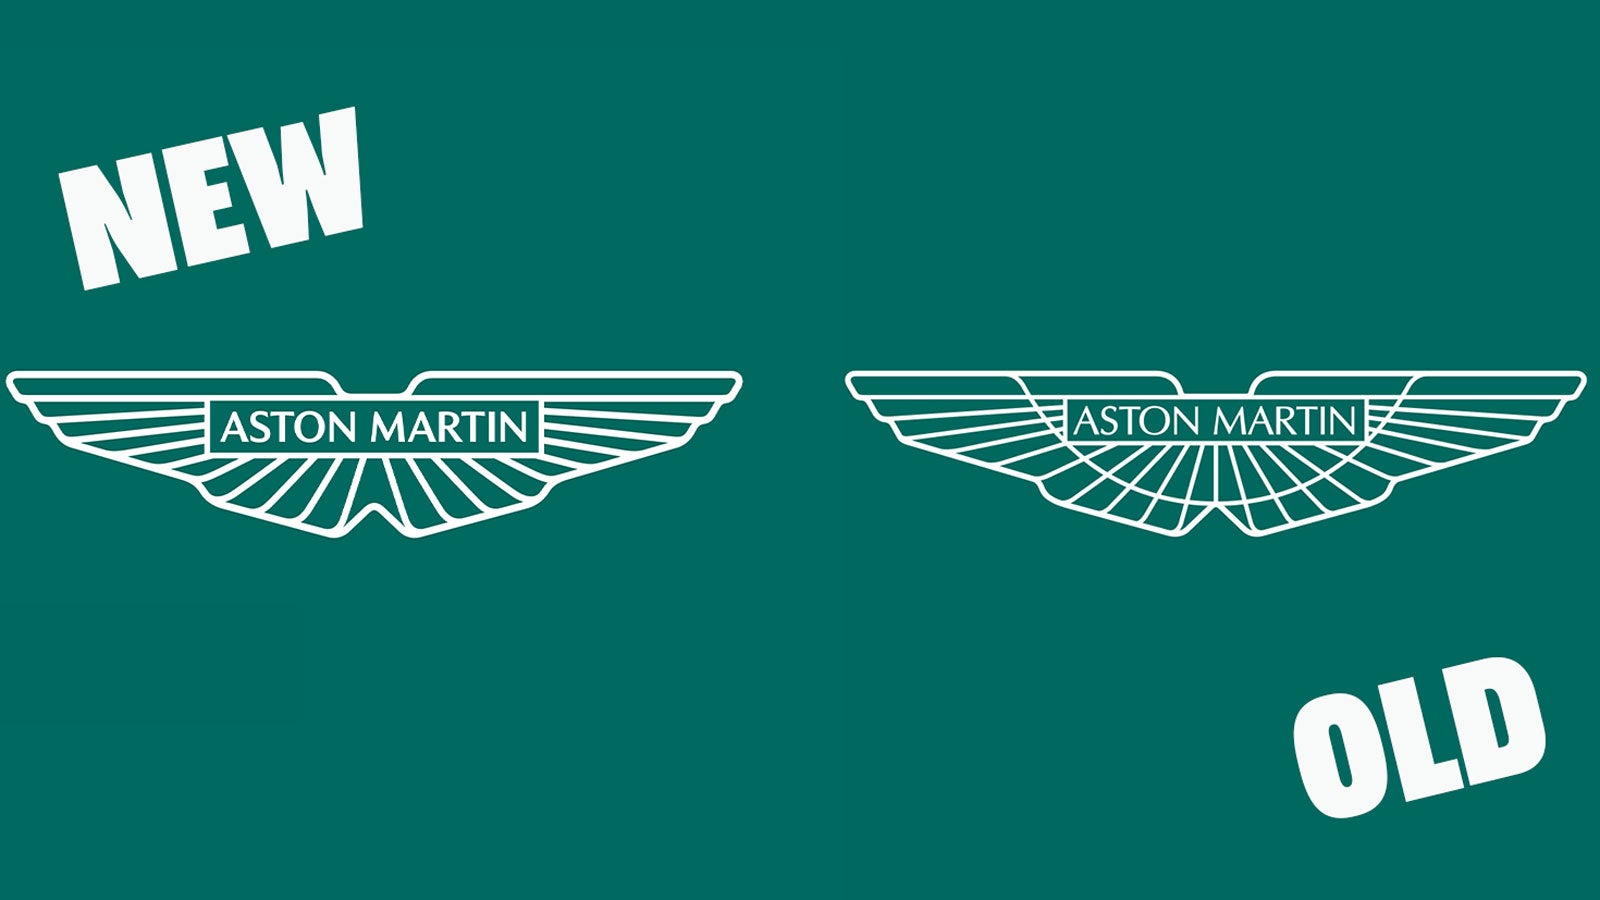 Aston Martin Has Its First New Logo in Almost 20 Years